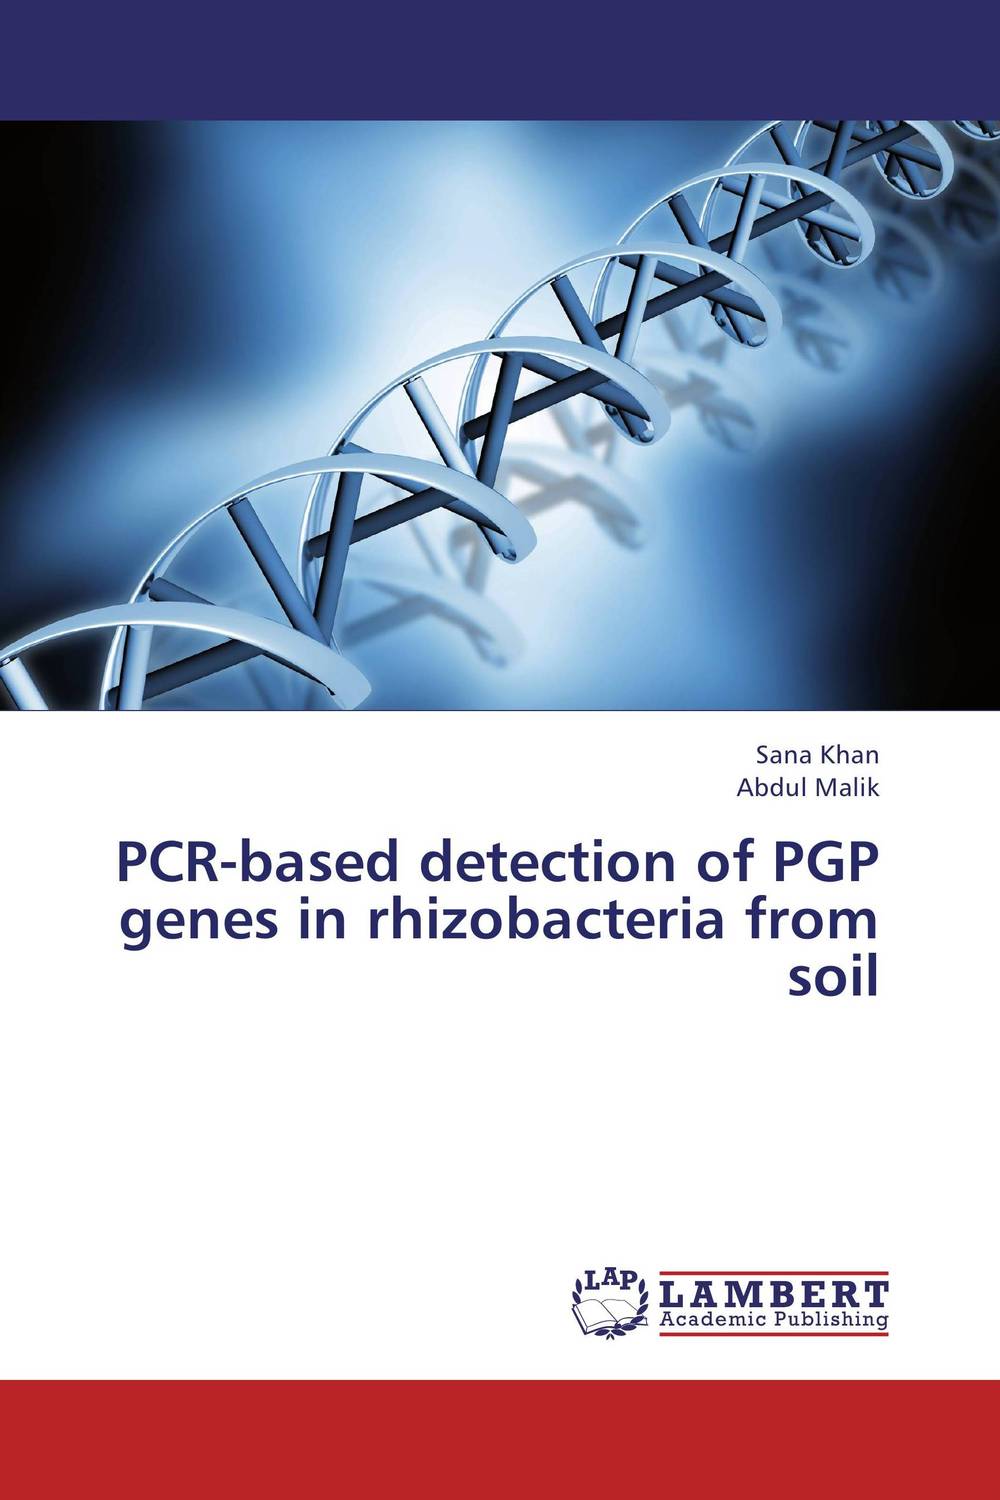 PCR-based detection of PGP genes in rhizobacteria from soil